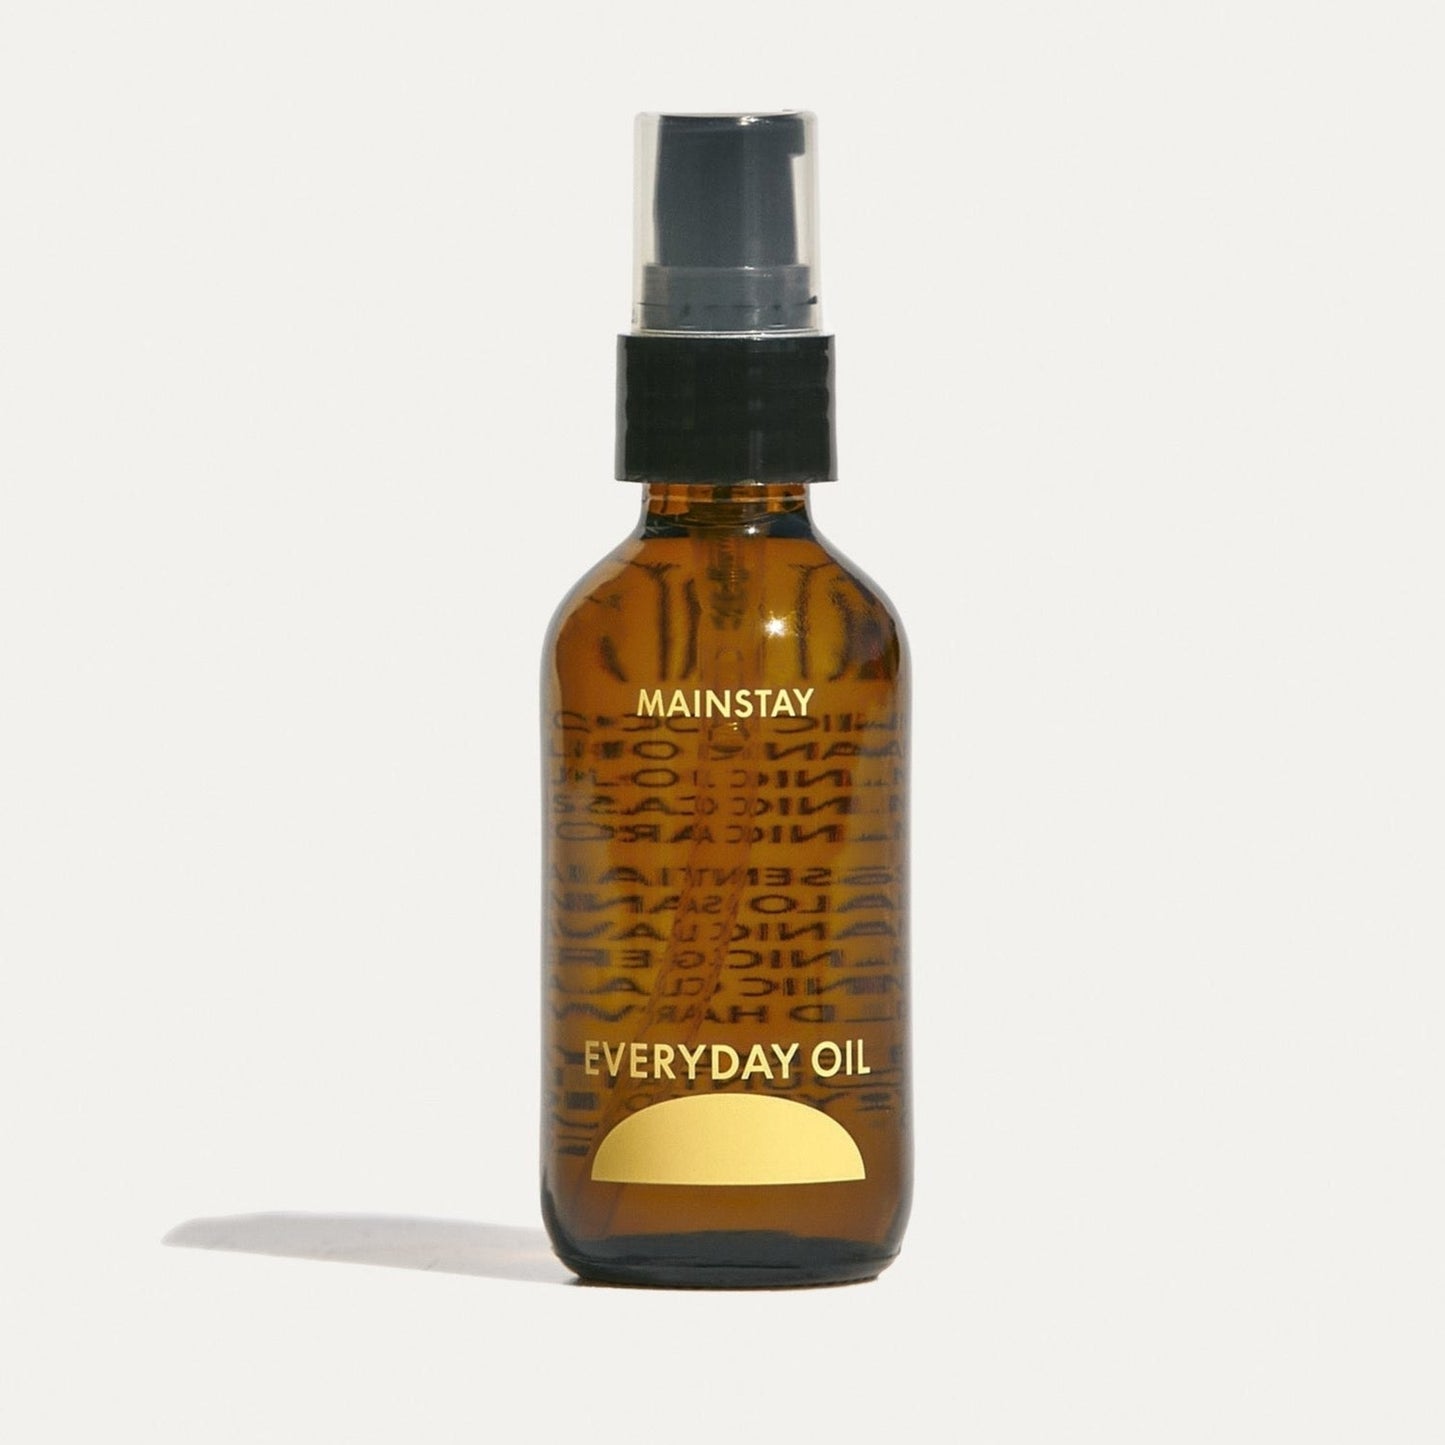 Everyday oil mainstay available at Easy Tiger Toronto